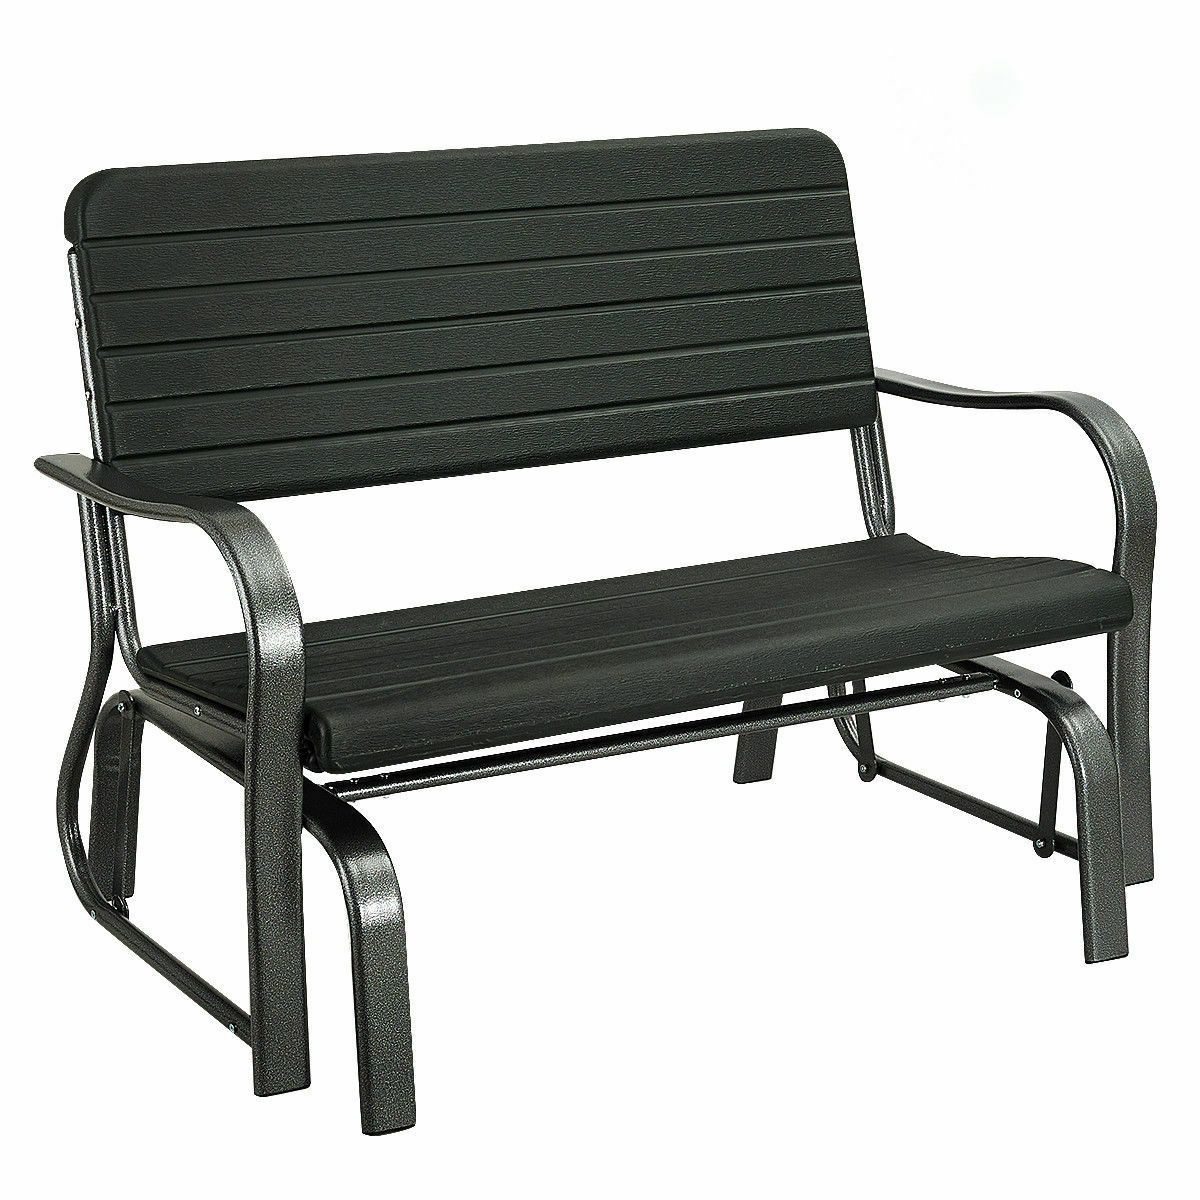 Outdoor Patio Swing Porch Rocker Glider Bench Loveseat Garden Seat Steel New For Well Liked Outdoor Patio Swing Glider Bench Chair S (View 12 of 30)